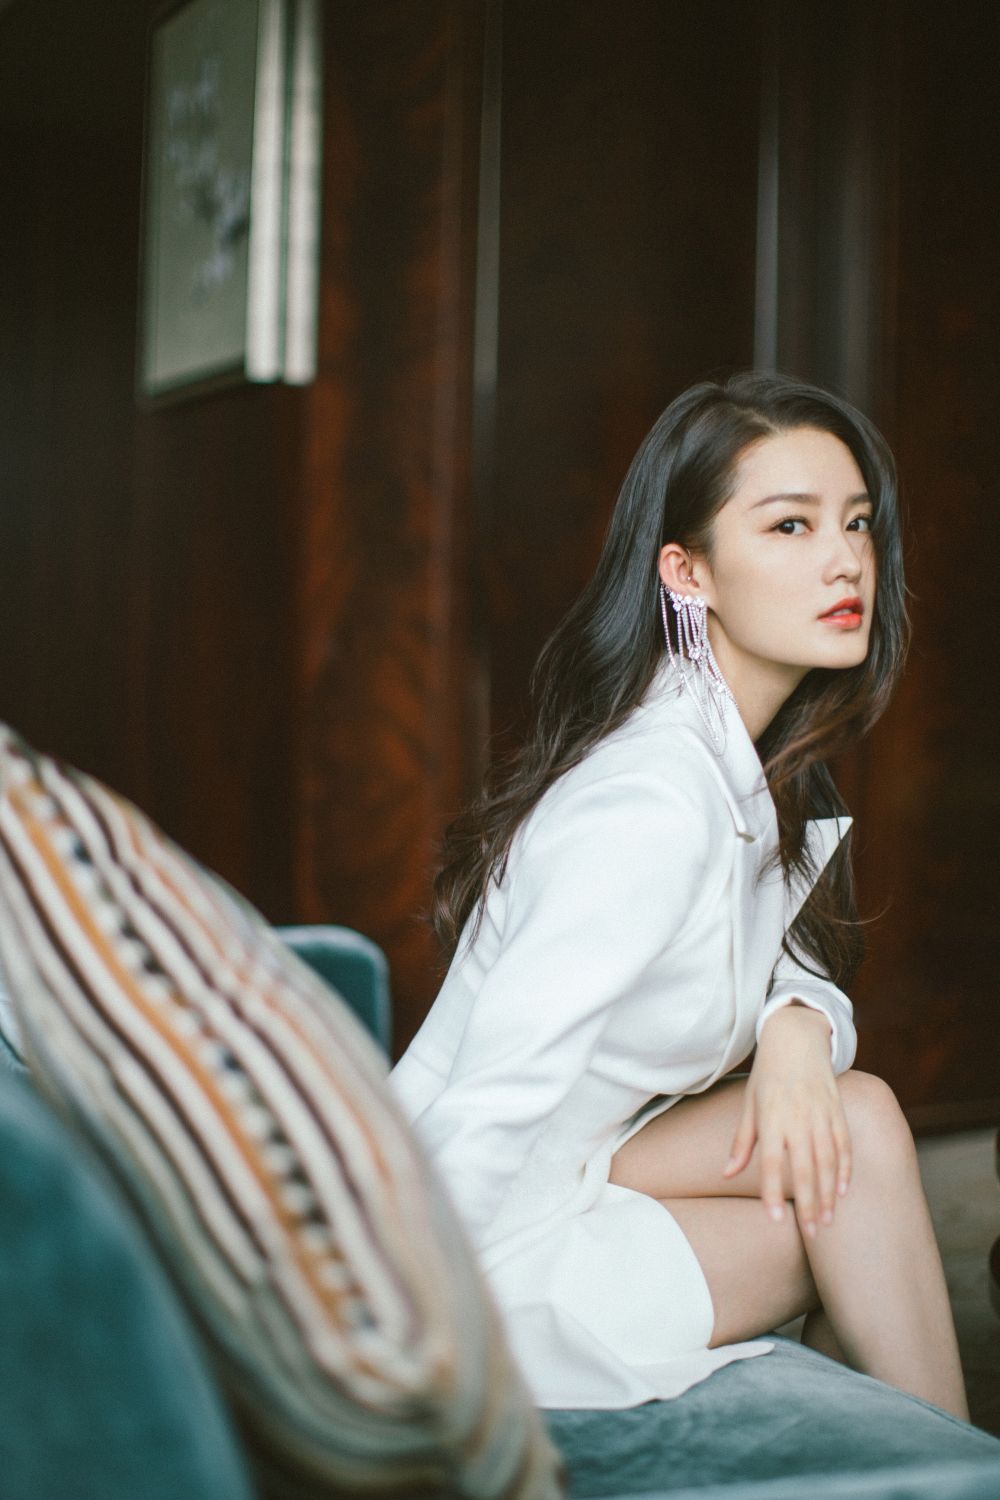 Qin Li Sexy and Hottest Photos , Latest Pics